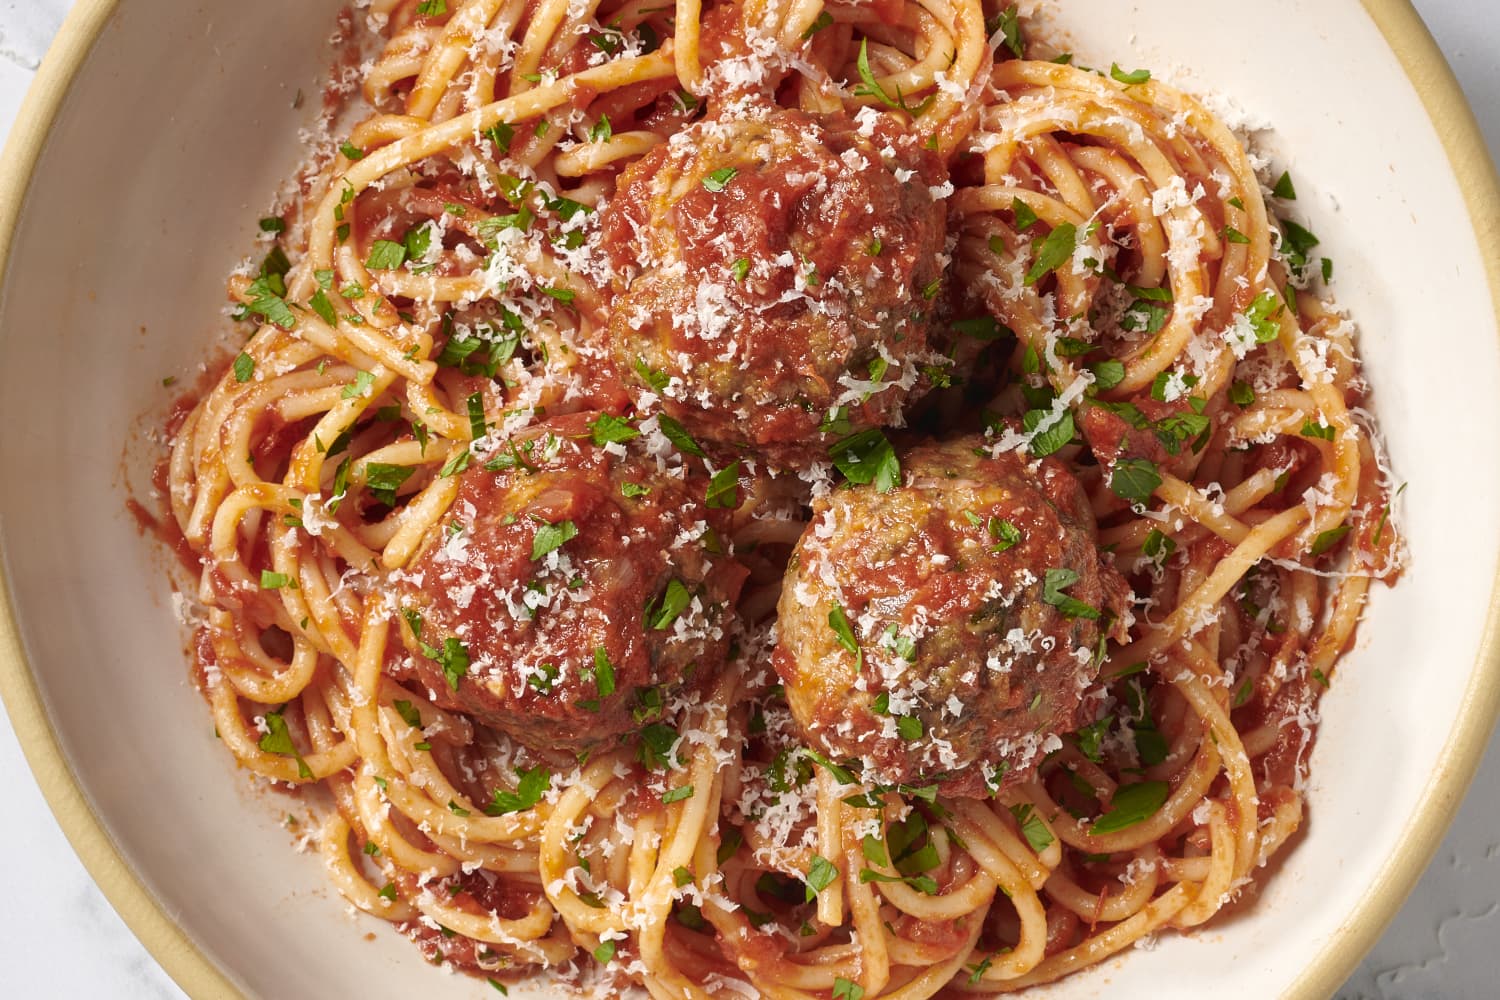 My Grandma’s Unexpectedly Delicious Meatball Rule I’ve Been Following for 15 Years